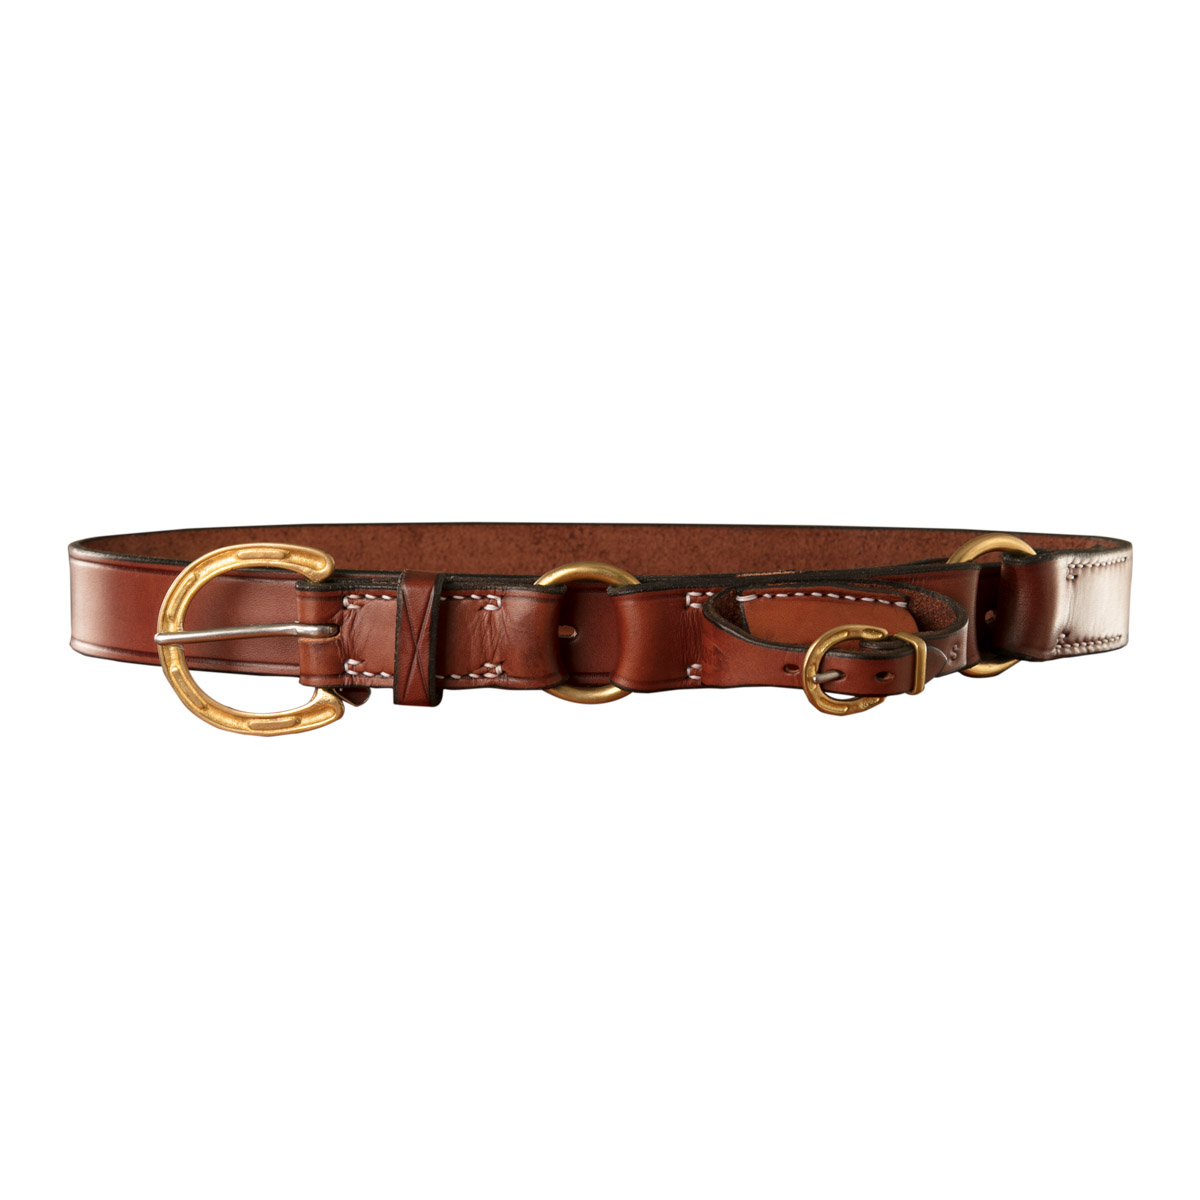 Stockmans Hobble Style Belt, Solid Leather, with Brass Horseshoe Buckle, 2 Rings and Pouch for Pocket Knife 1